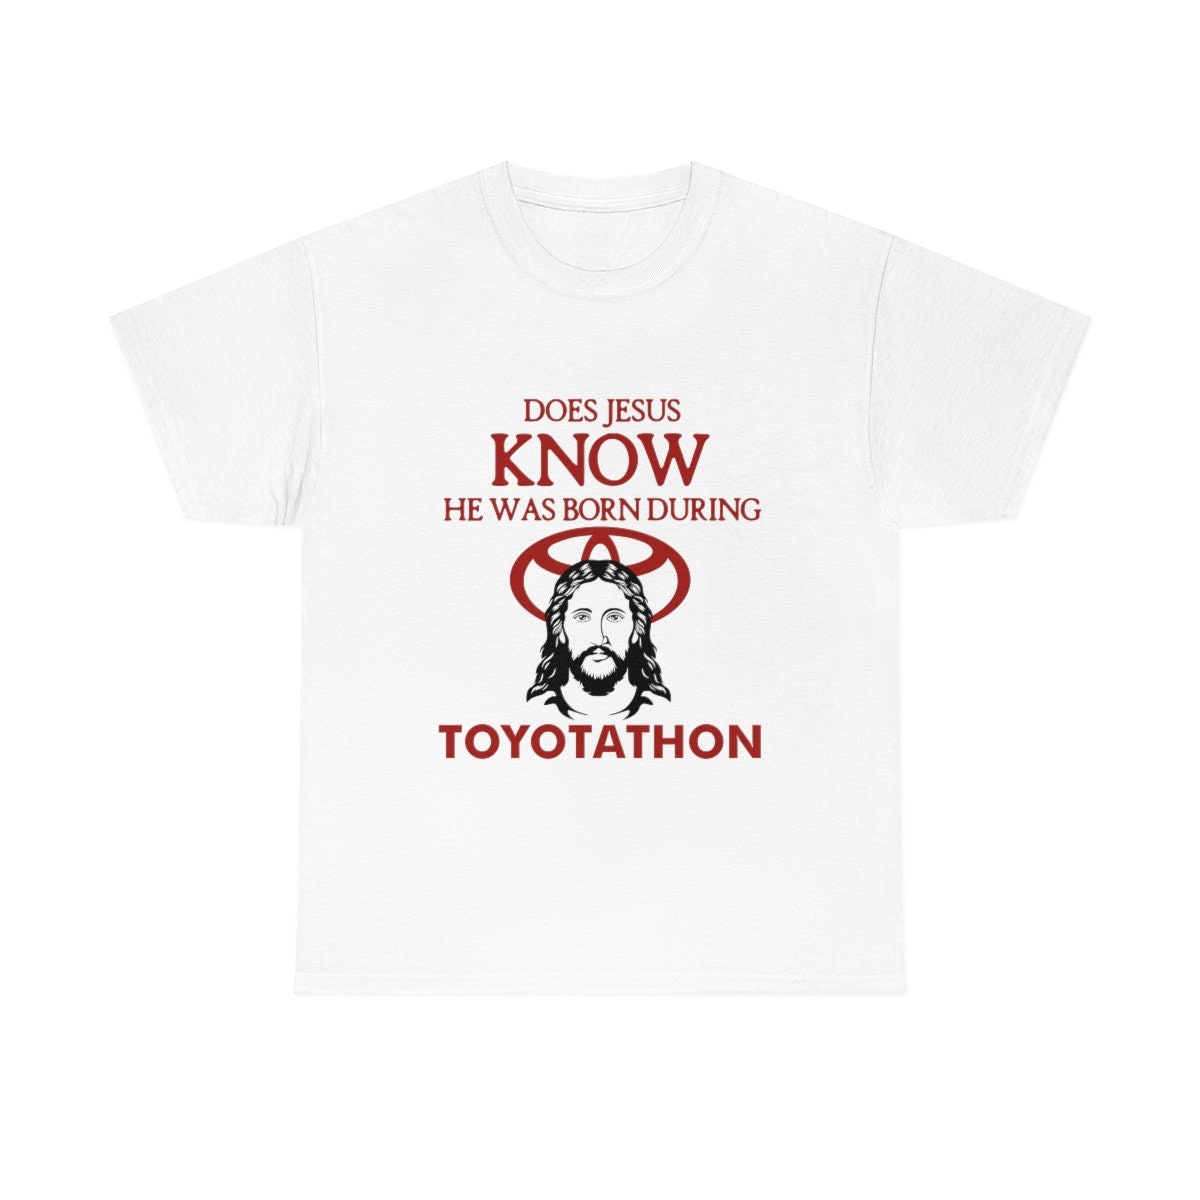 Discover Does Jesus Know He Was Born During Toyotathon tee